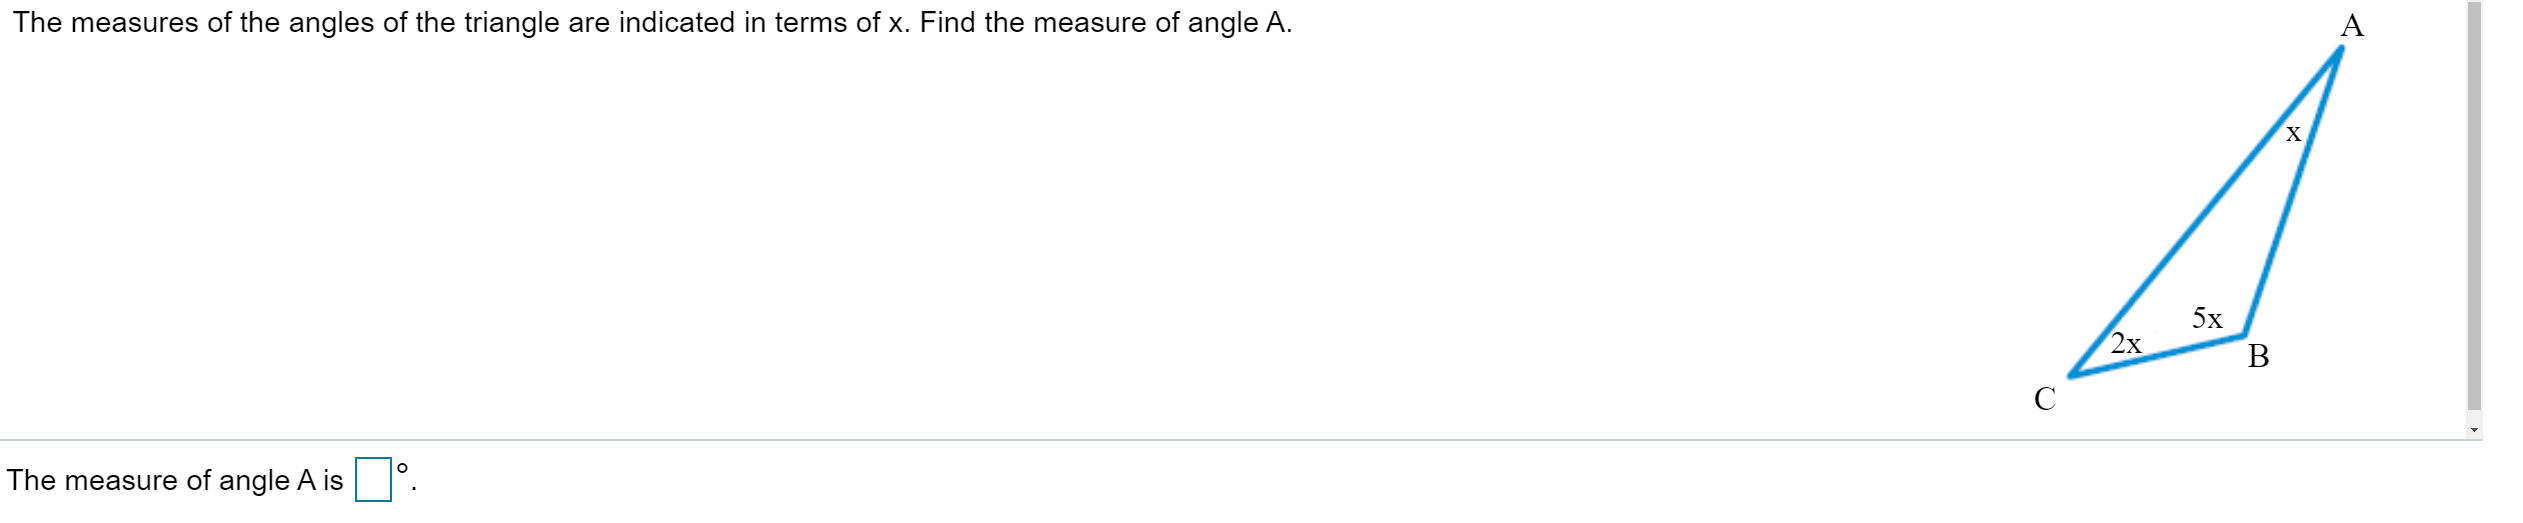 The measures of the angles of the triangle are indicated in terms of x. Find the measure of angle A.
A
х
5x
2х
В
С
The measure of angle A is
